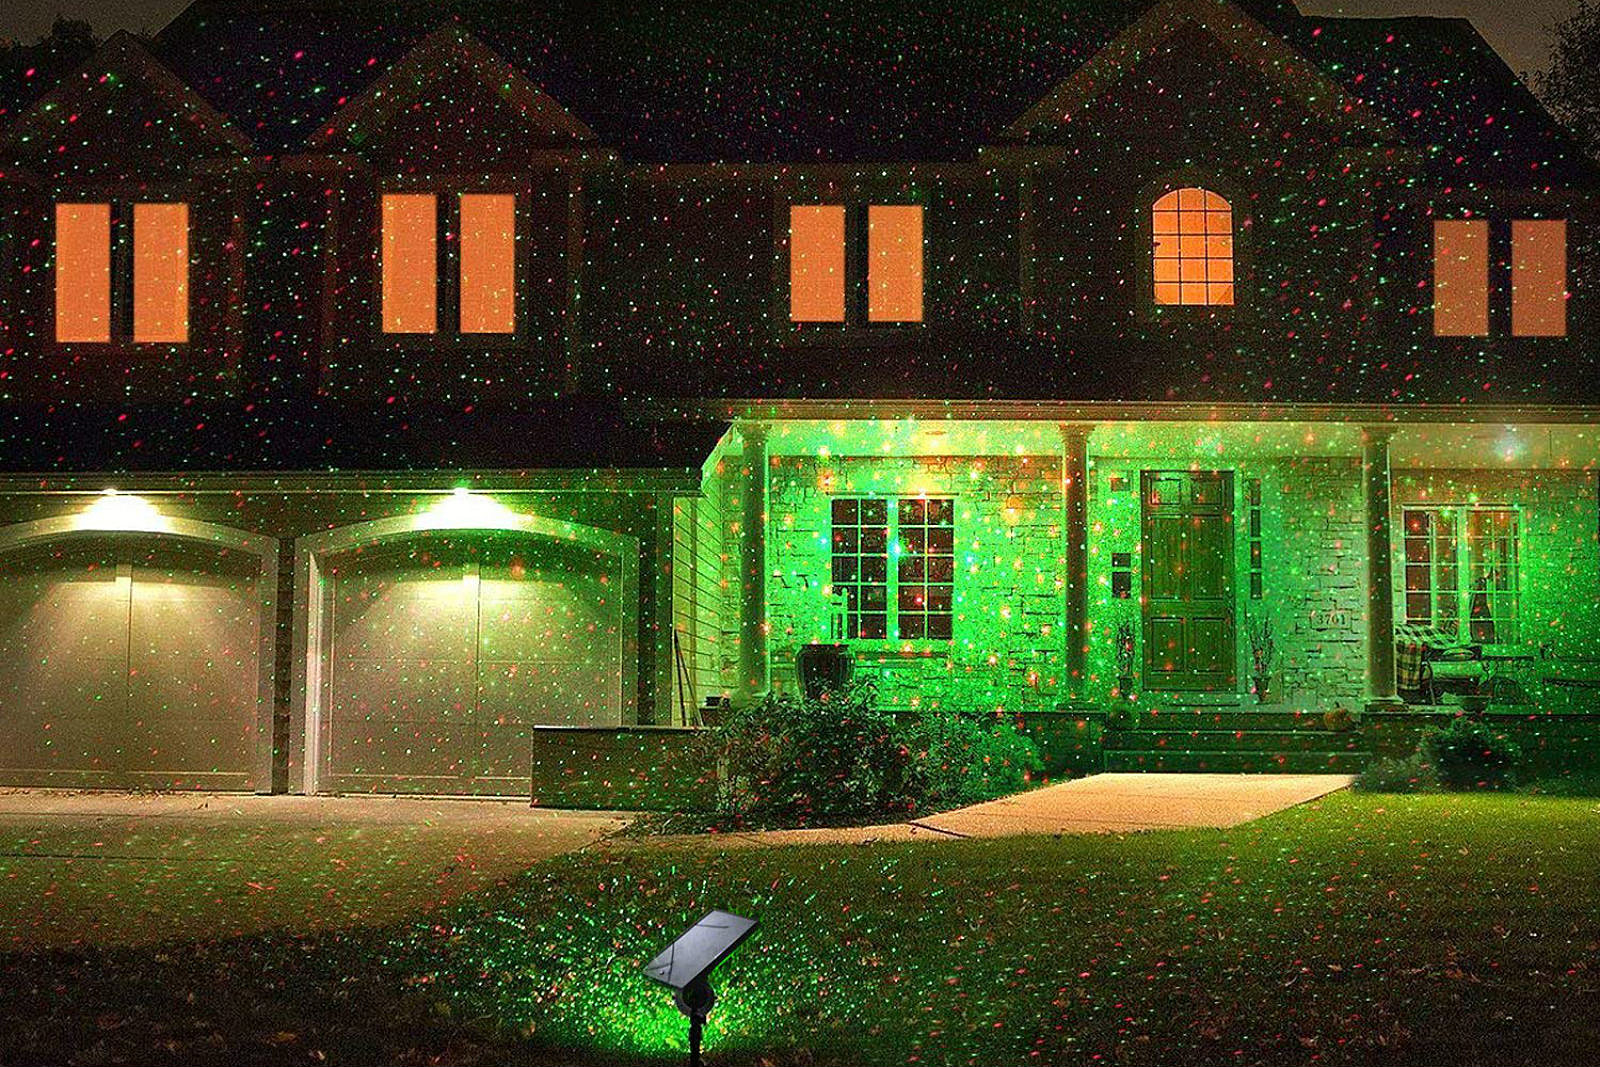 Your Laser Christmas Light Projector Is Ruining My Christmas Spirit  [OPINION]